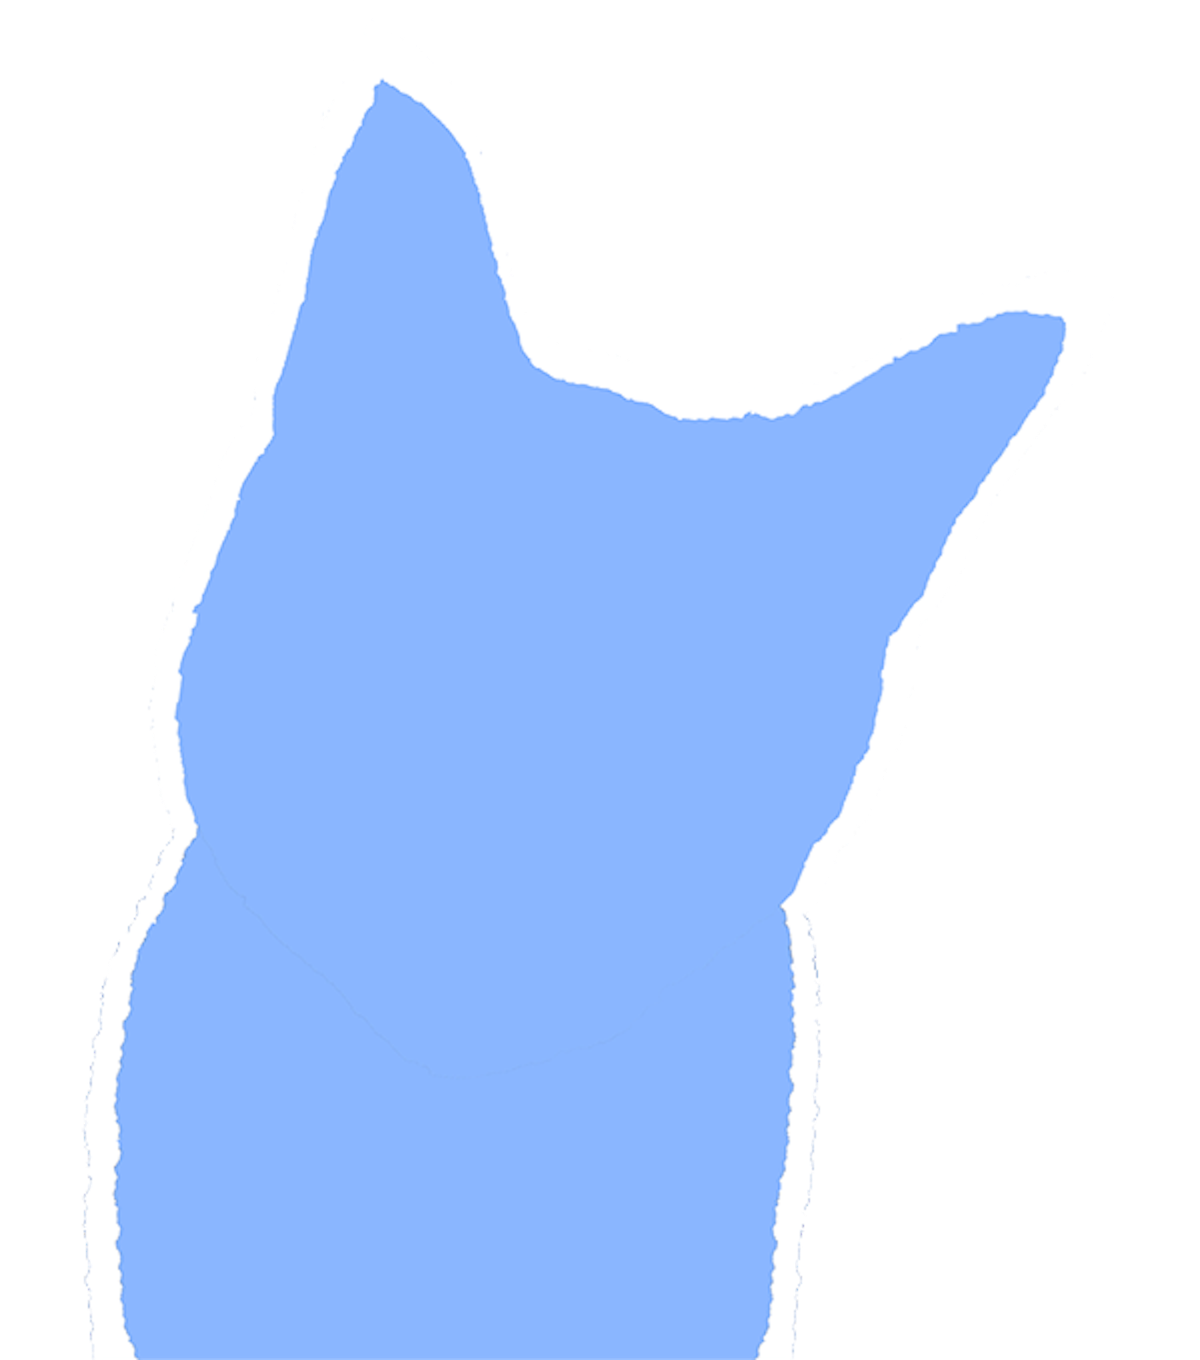 Stylised silhouette of a cat as logo for Marcel the Cat